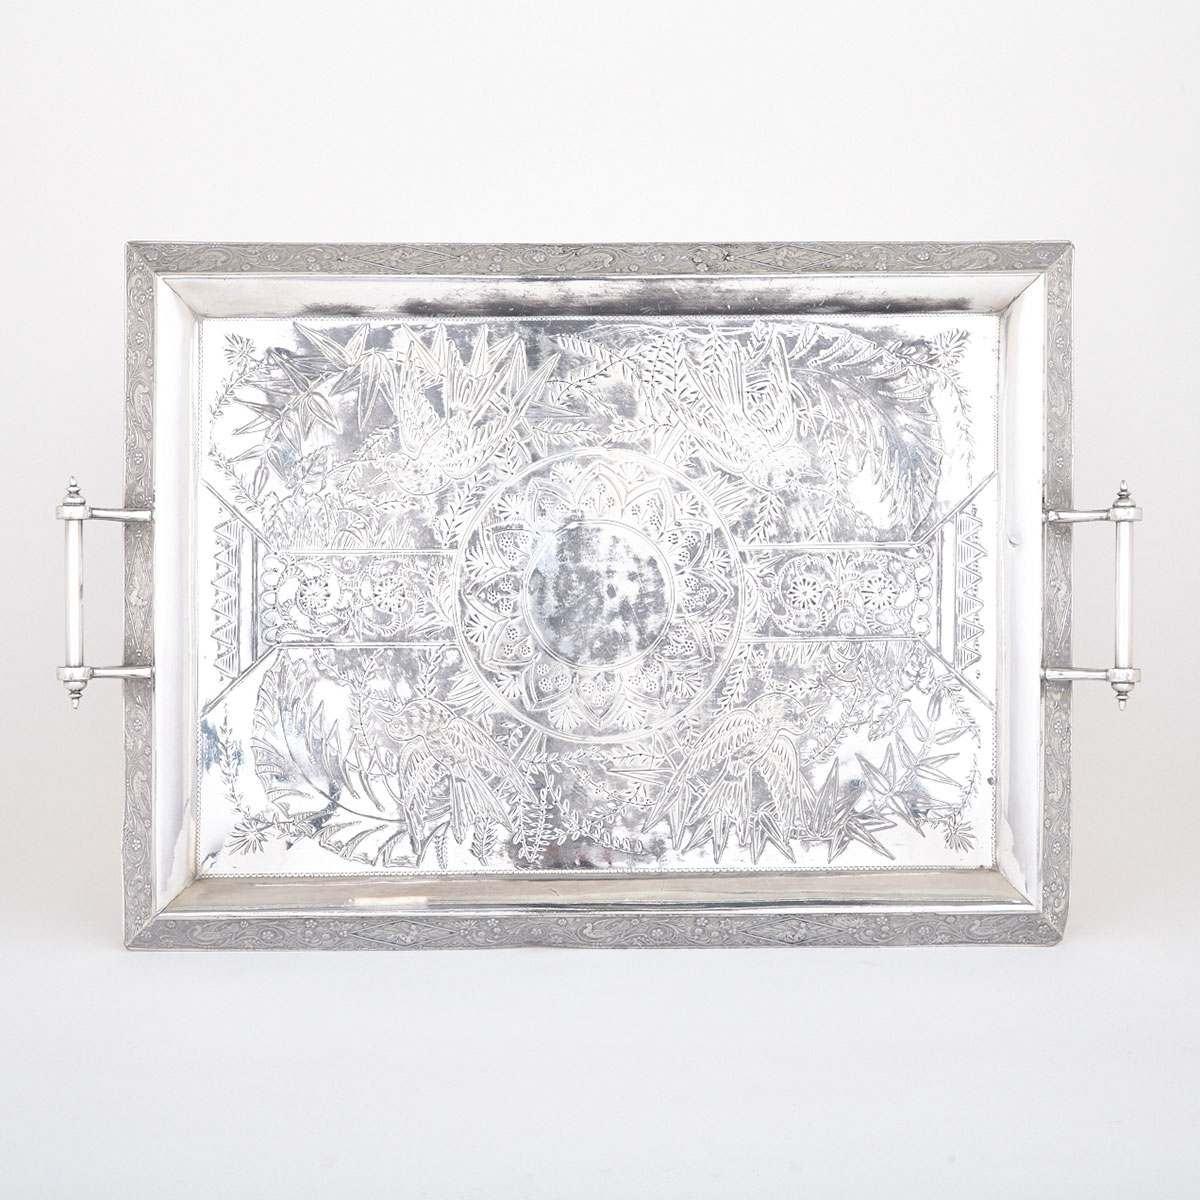 American Silver Plated Eastlake Style Rectangular Serving Tray, Taunton Silver Plate Co., c.1880